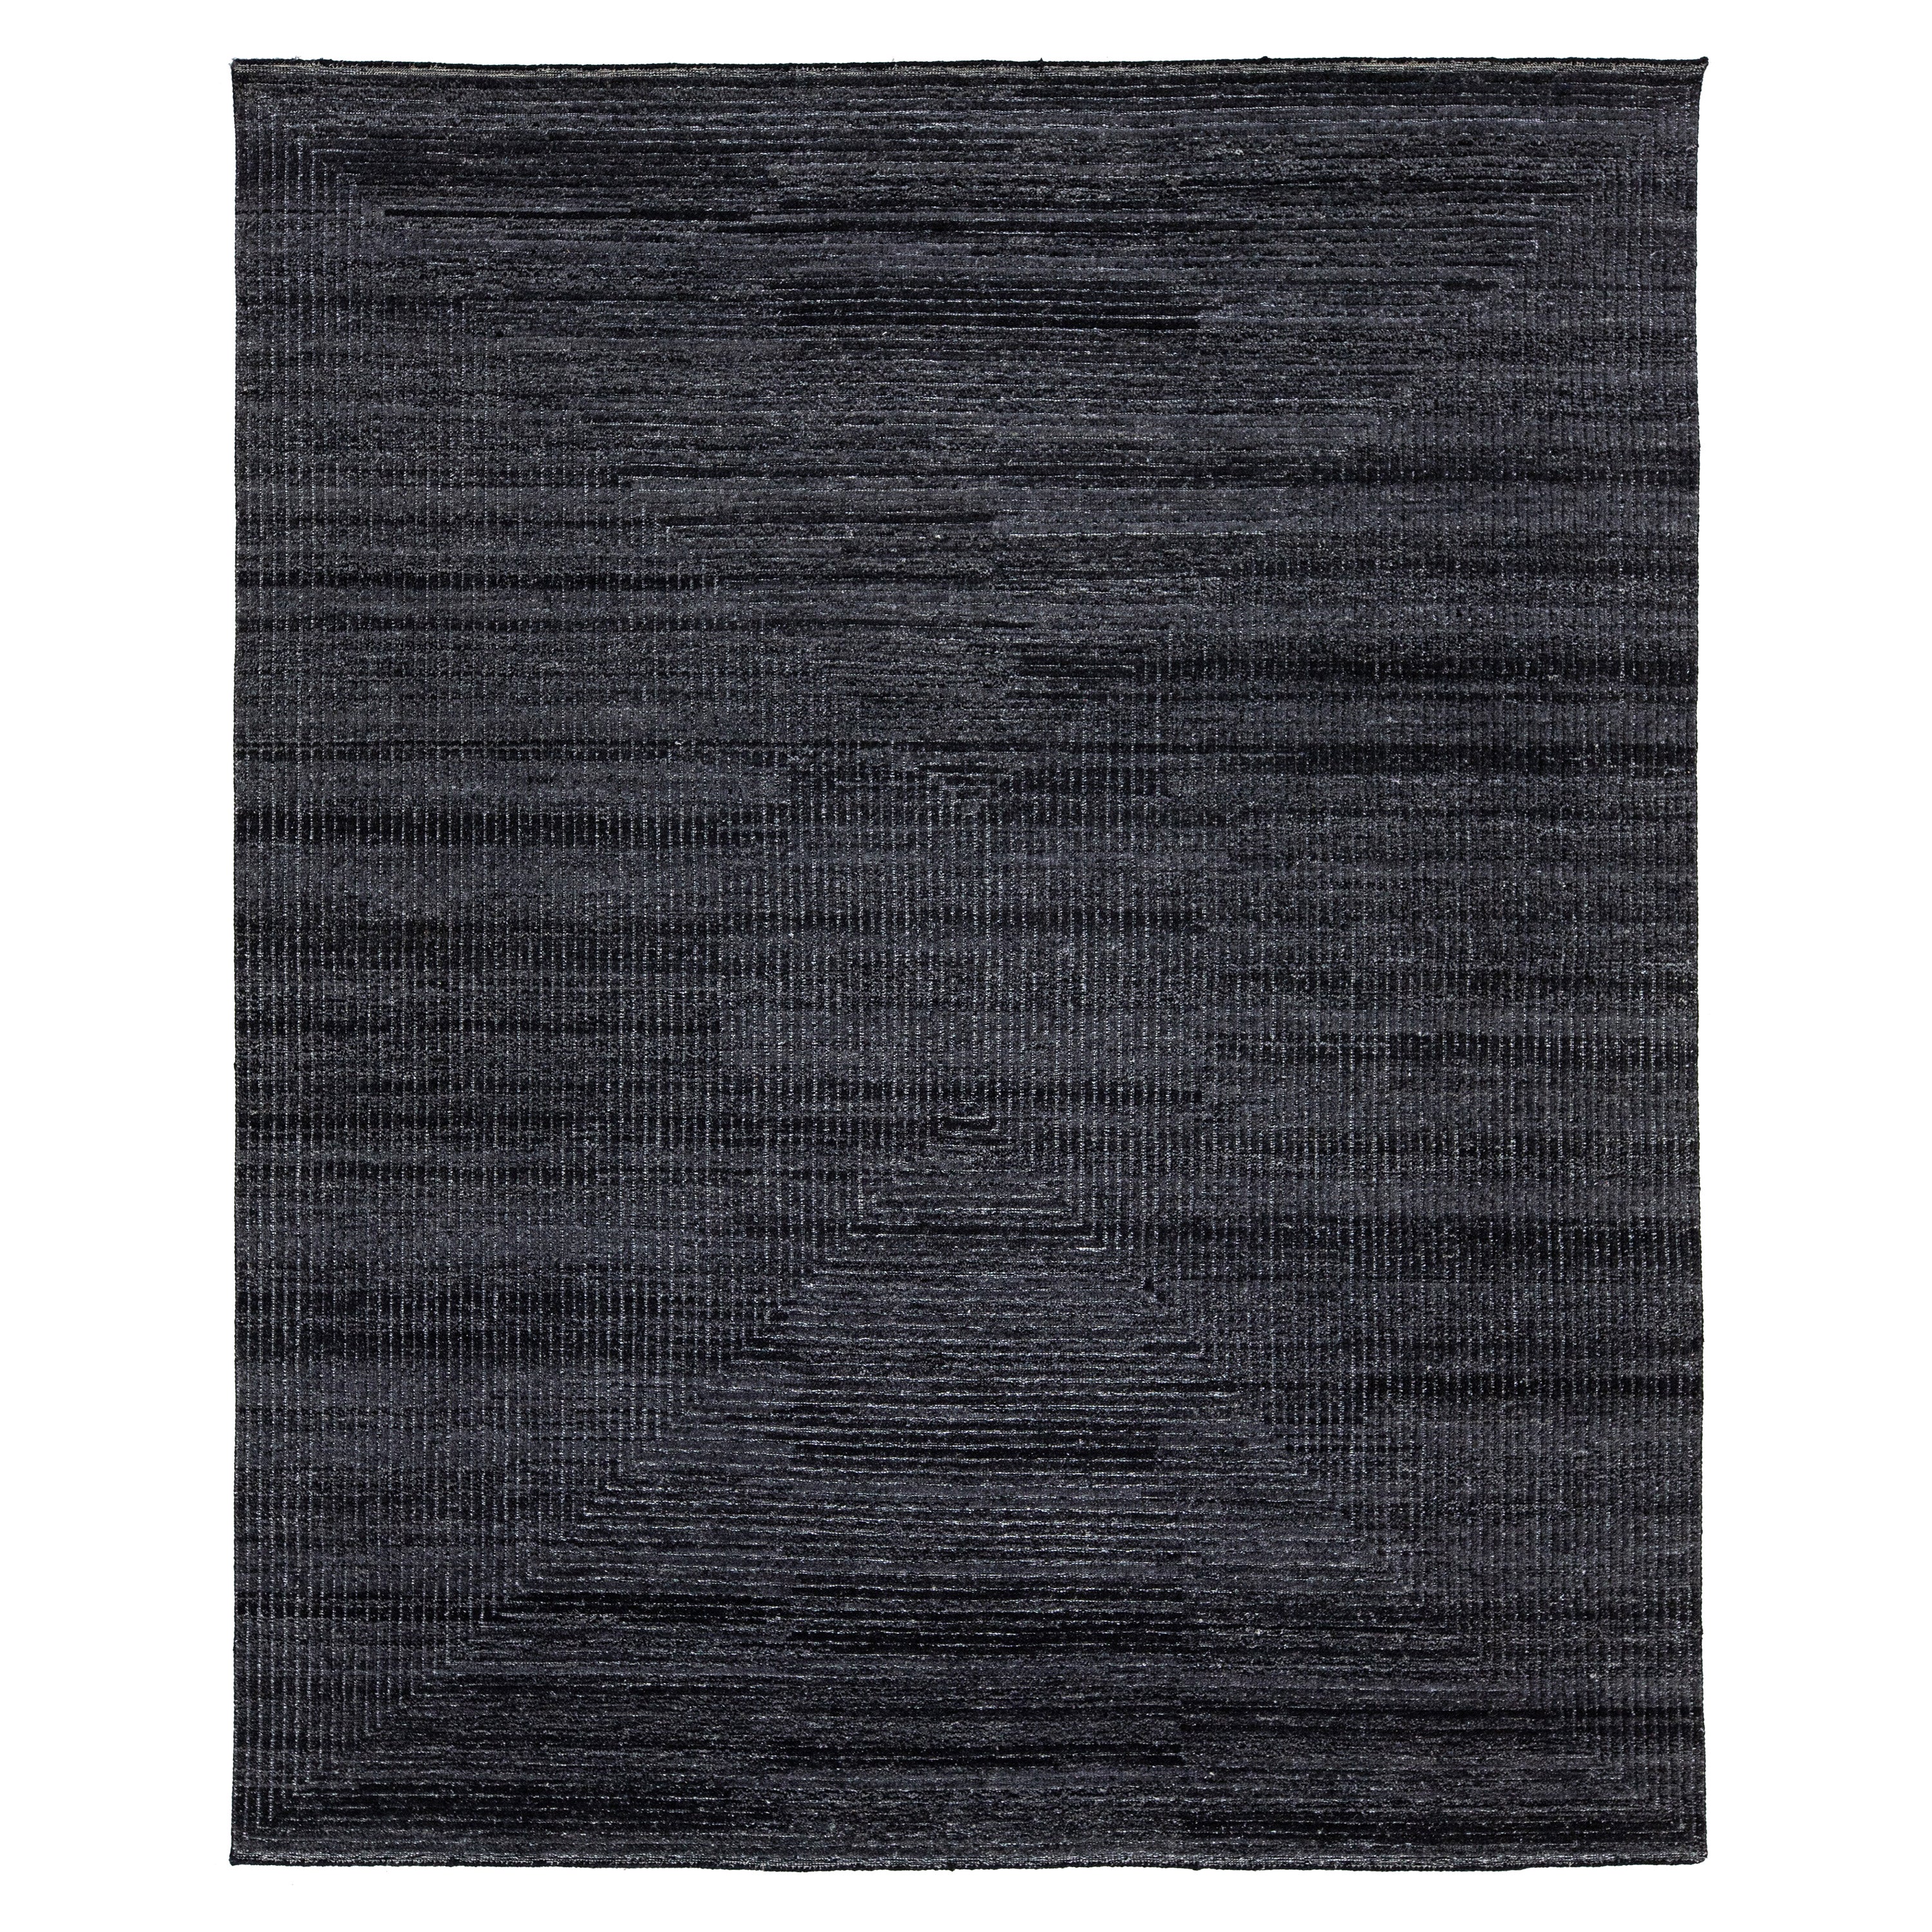 Contemporary Geometric Moroccan Style Wool Rug In Charcoal